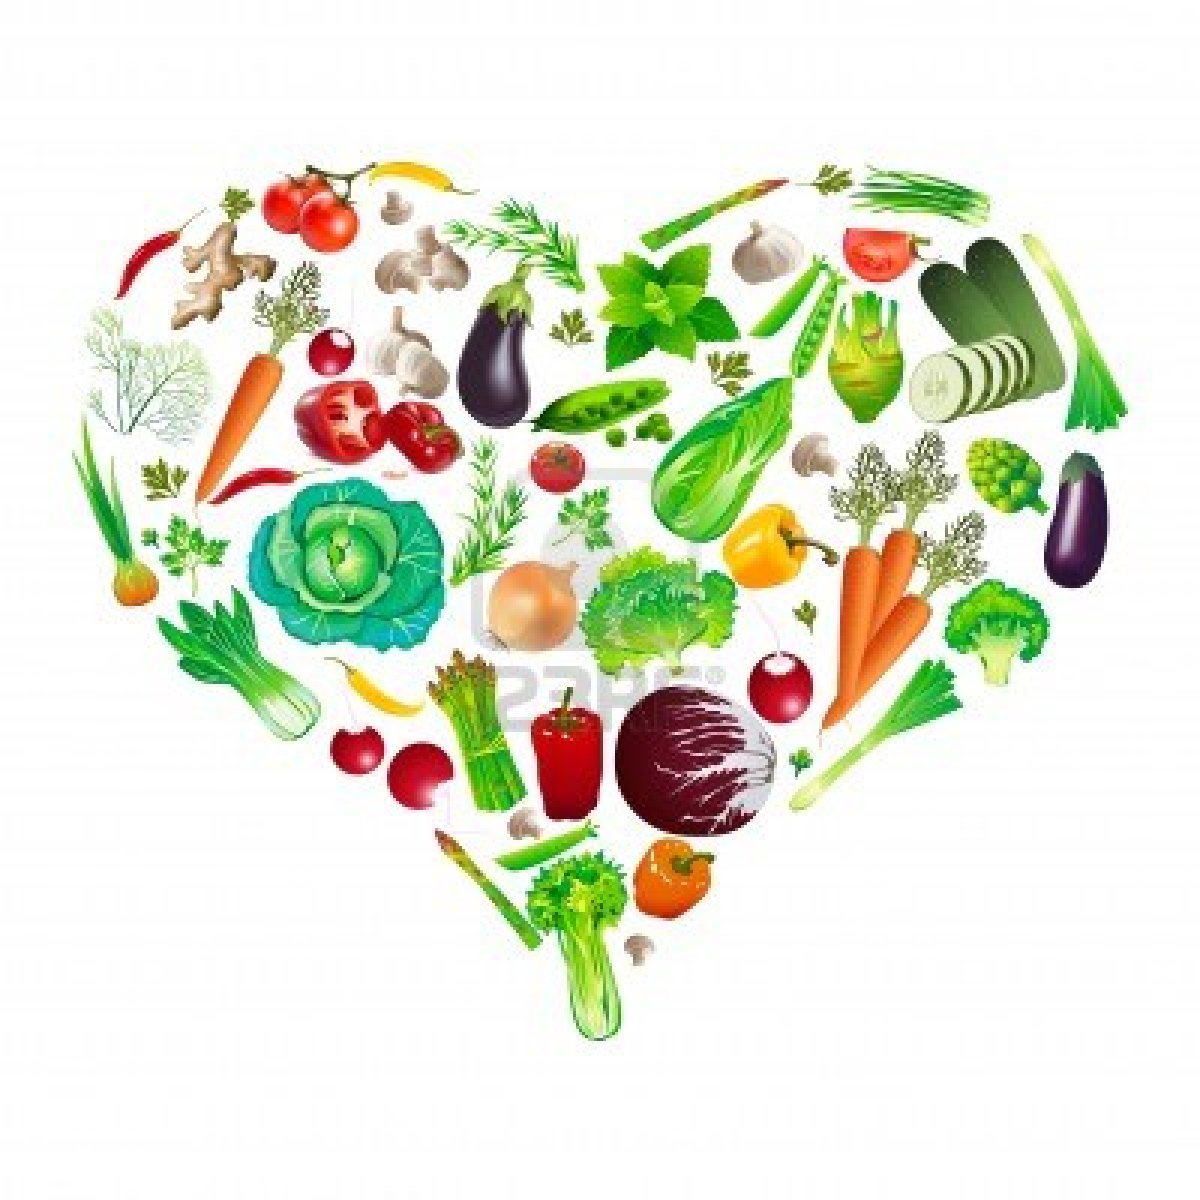 Heart Shape By Various Vegetables Royalty Free Cliparts, Vectors ...